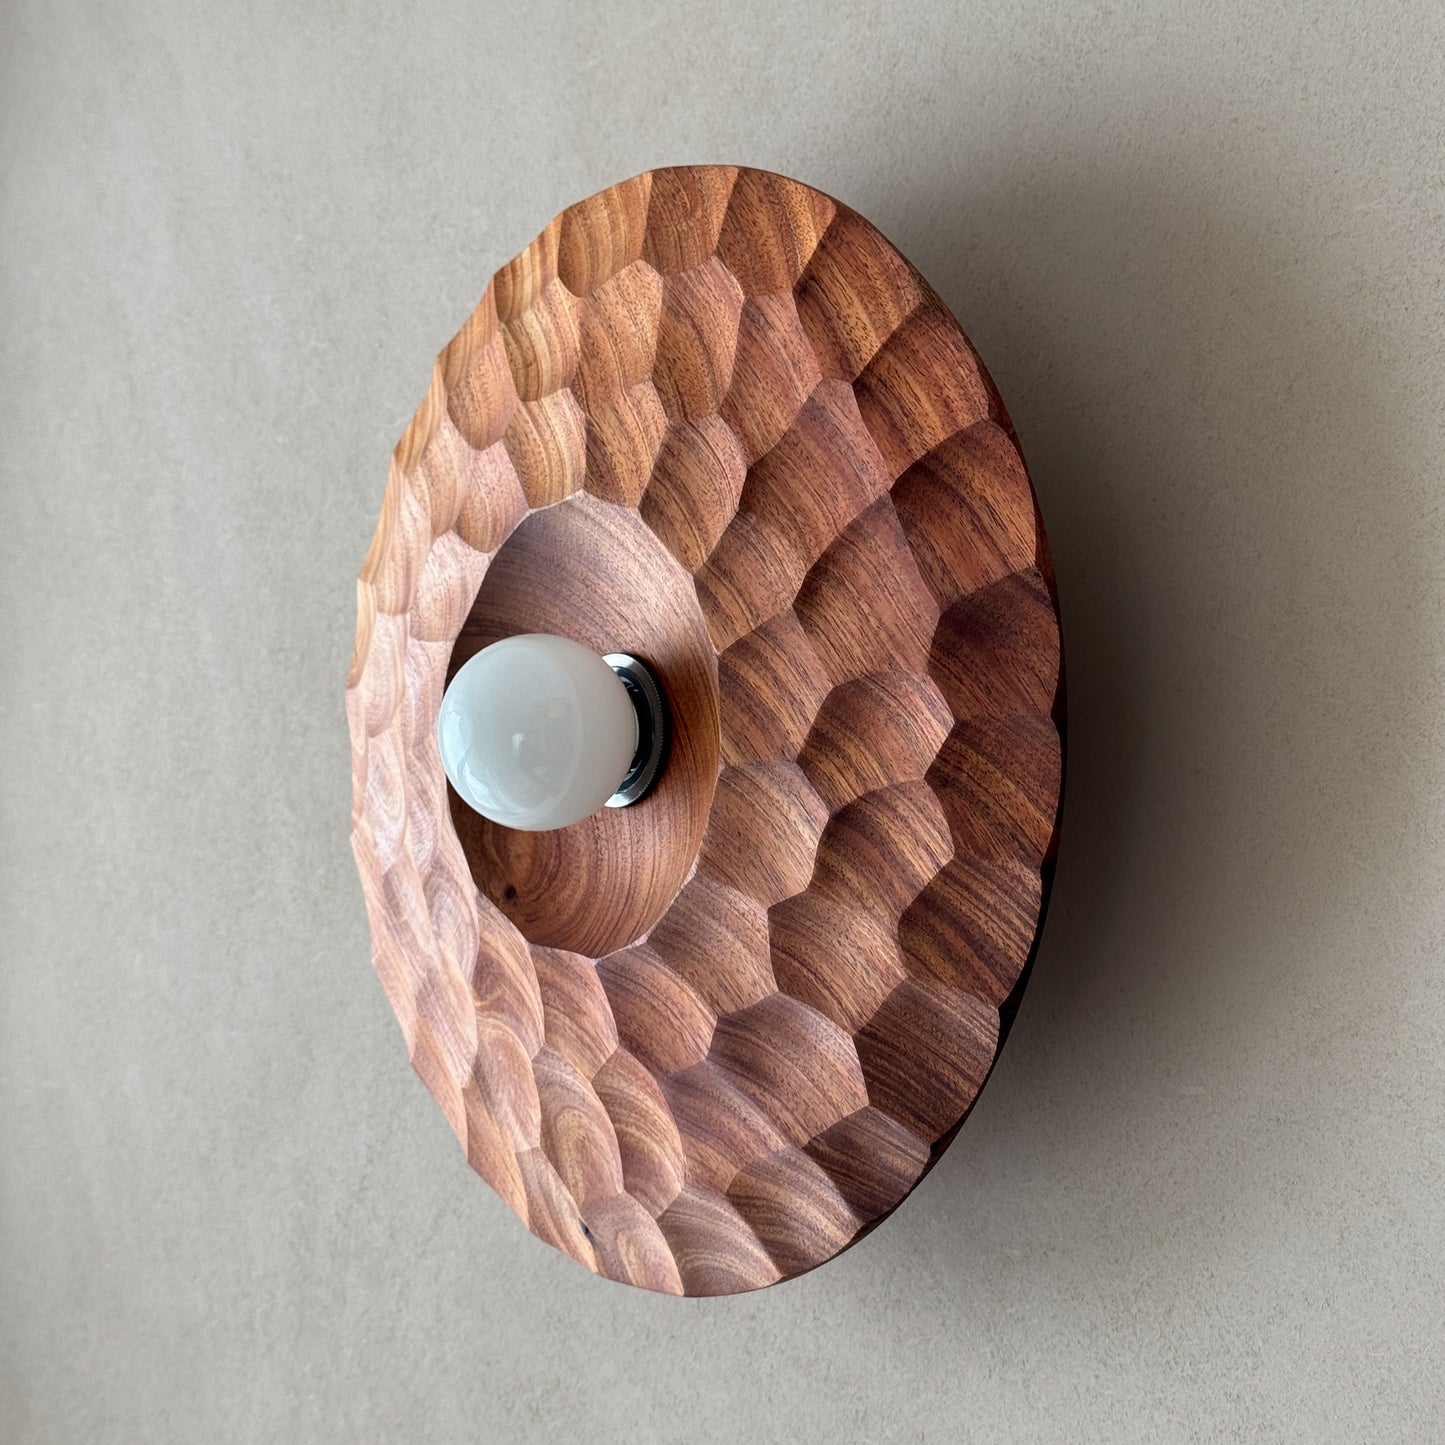 "There is no light without shadow" | Acacia Wall Lamp